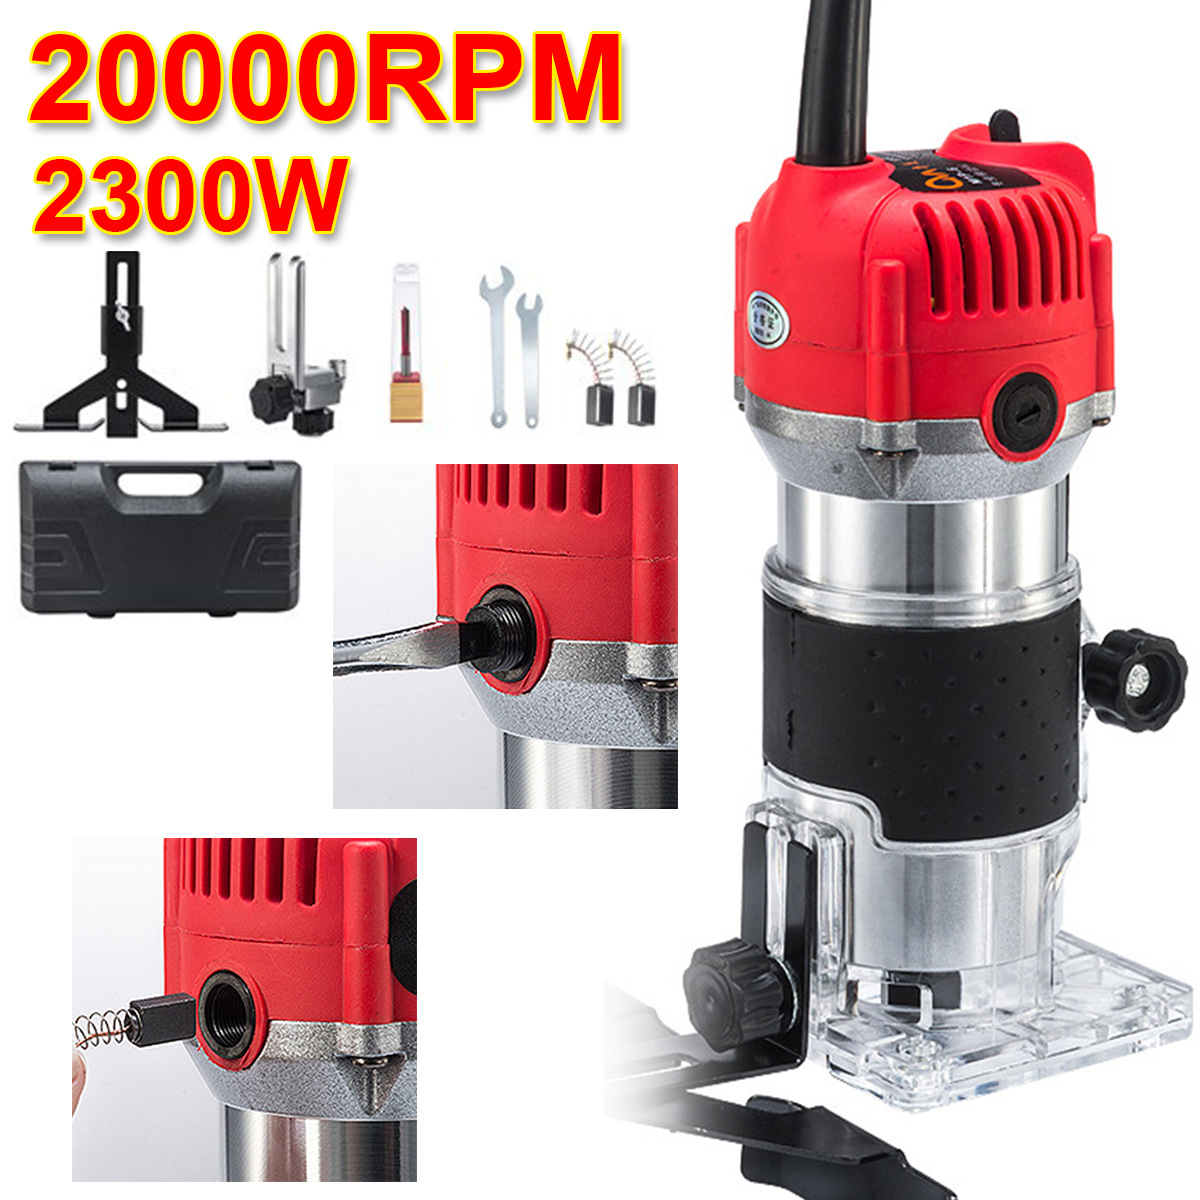 110V220V-2300W-Electric-Hand-Trimmer-Router-Wood-Laminate-Palm-Joiners-Working-Cutting-Machine-1735590-1